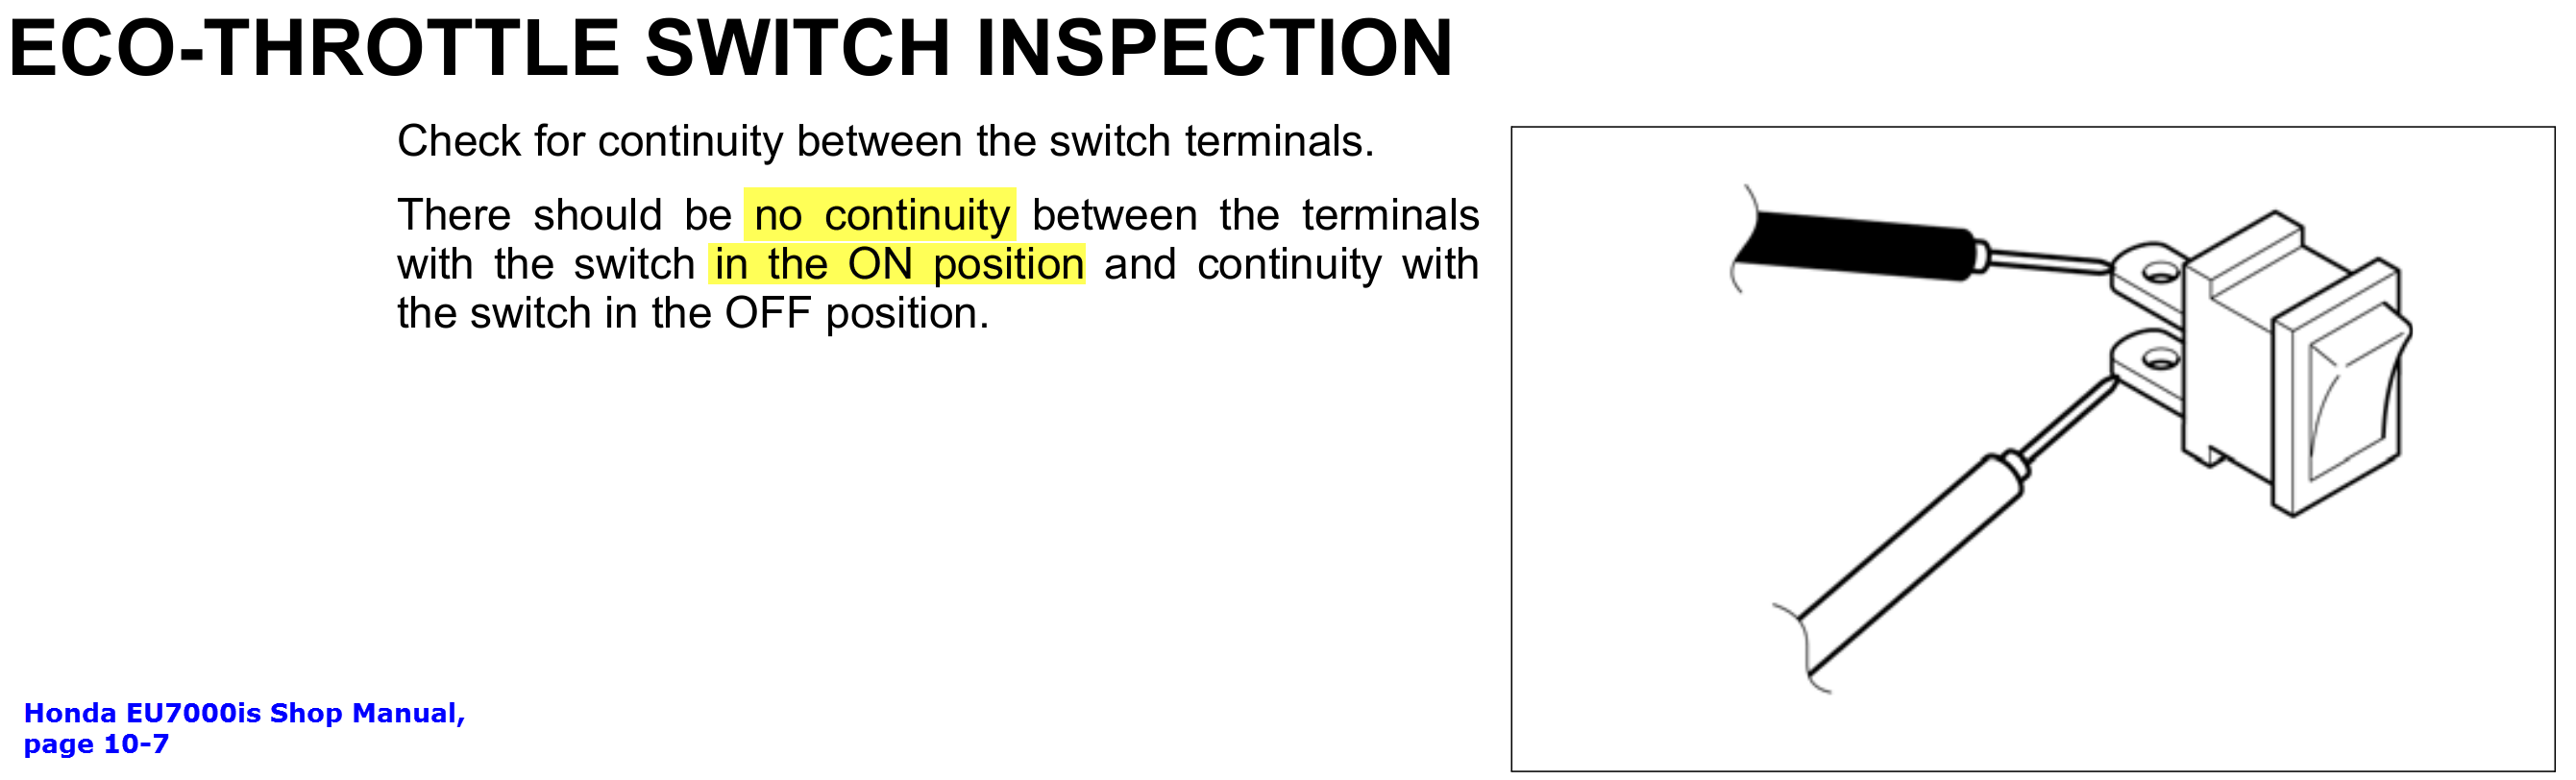 Honda EU7000is EcoThrottle switch testing (from EU7000is Shop Manual, page 10-7).